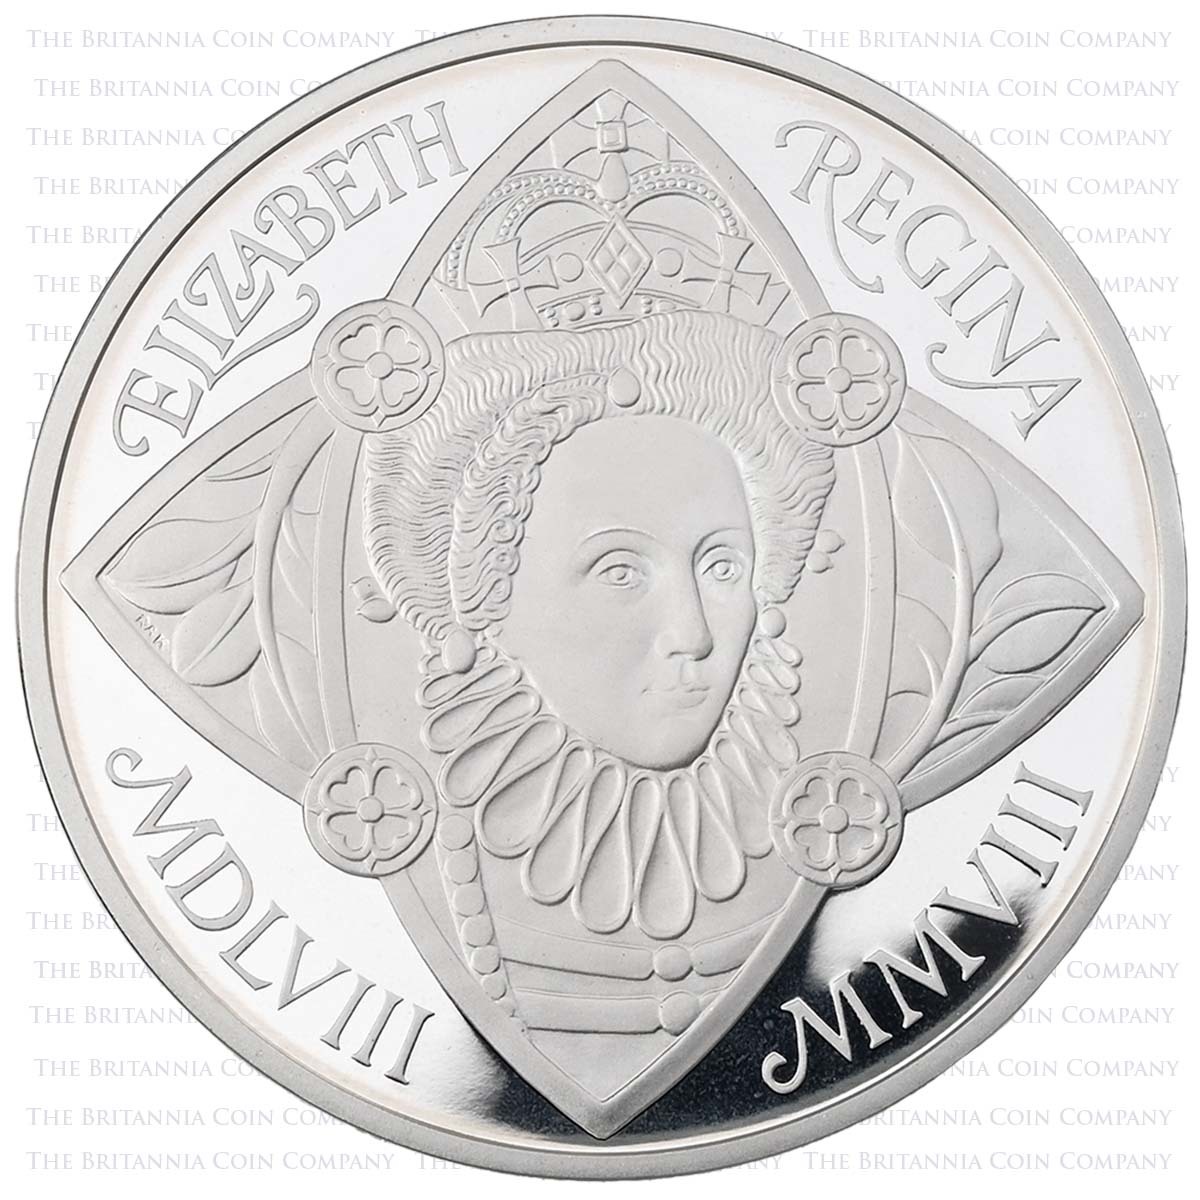 UKQEFSP 2008 Elizabeth I Accession 450th Anniversary £5 Crown Silver Proof Reverse